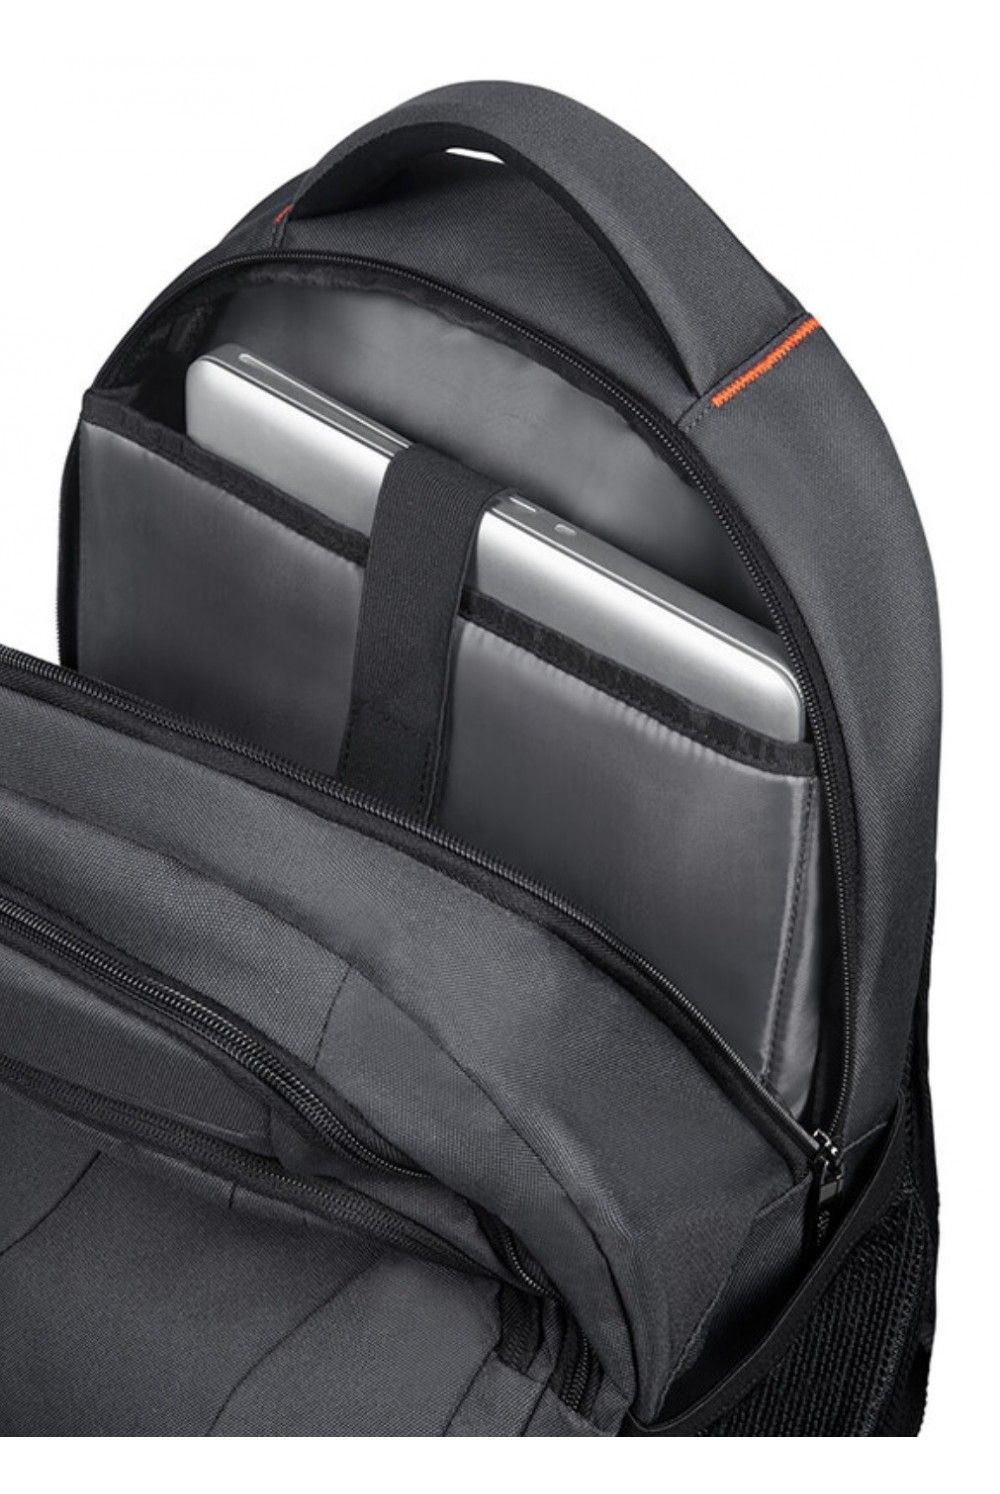 AT Laptop Backpack Work 15.6 inches